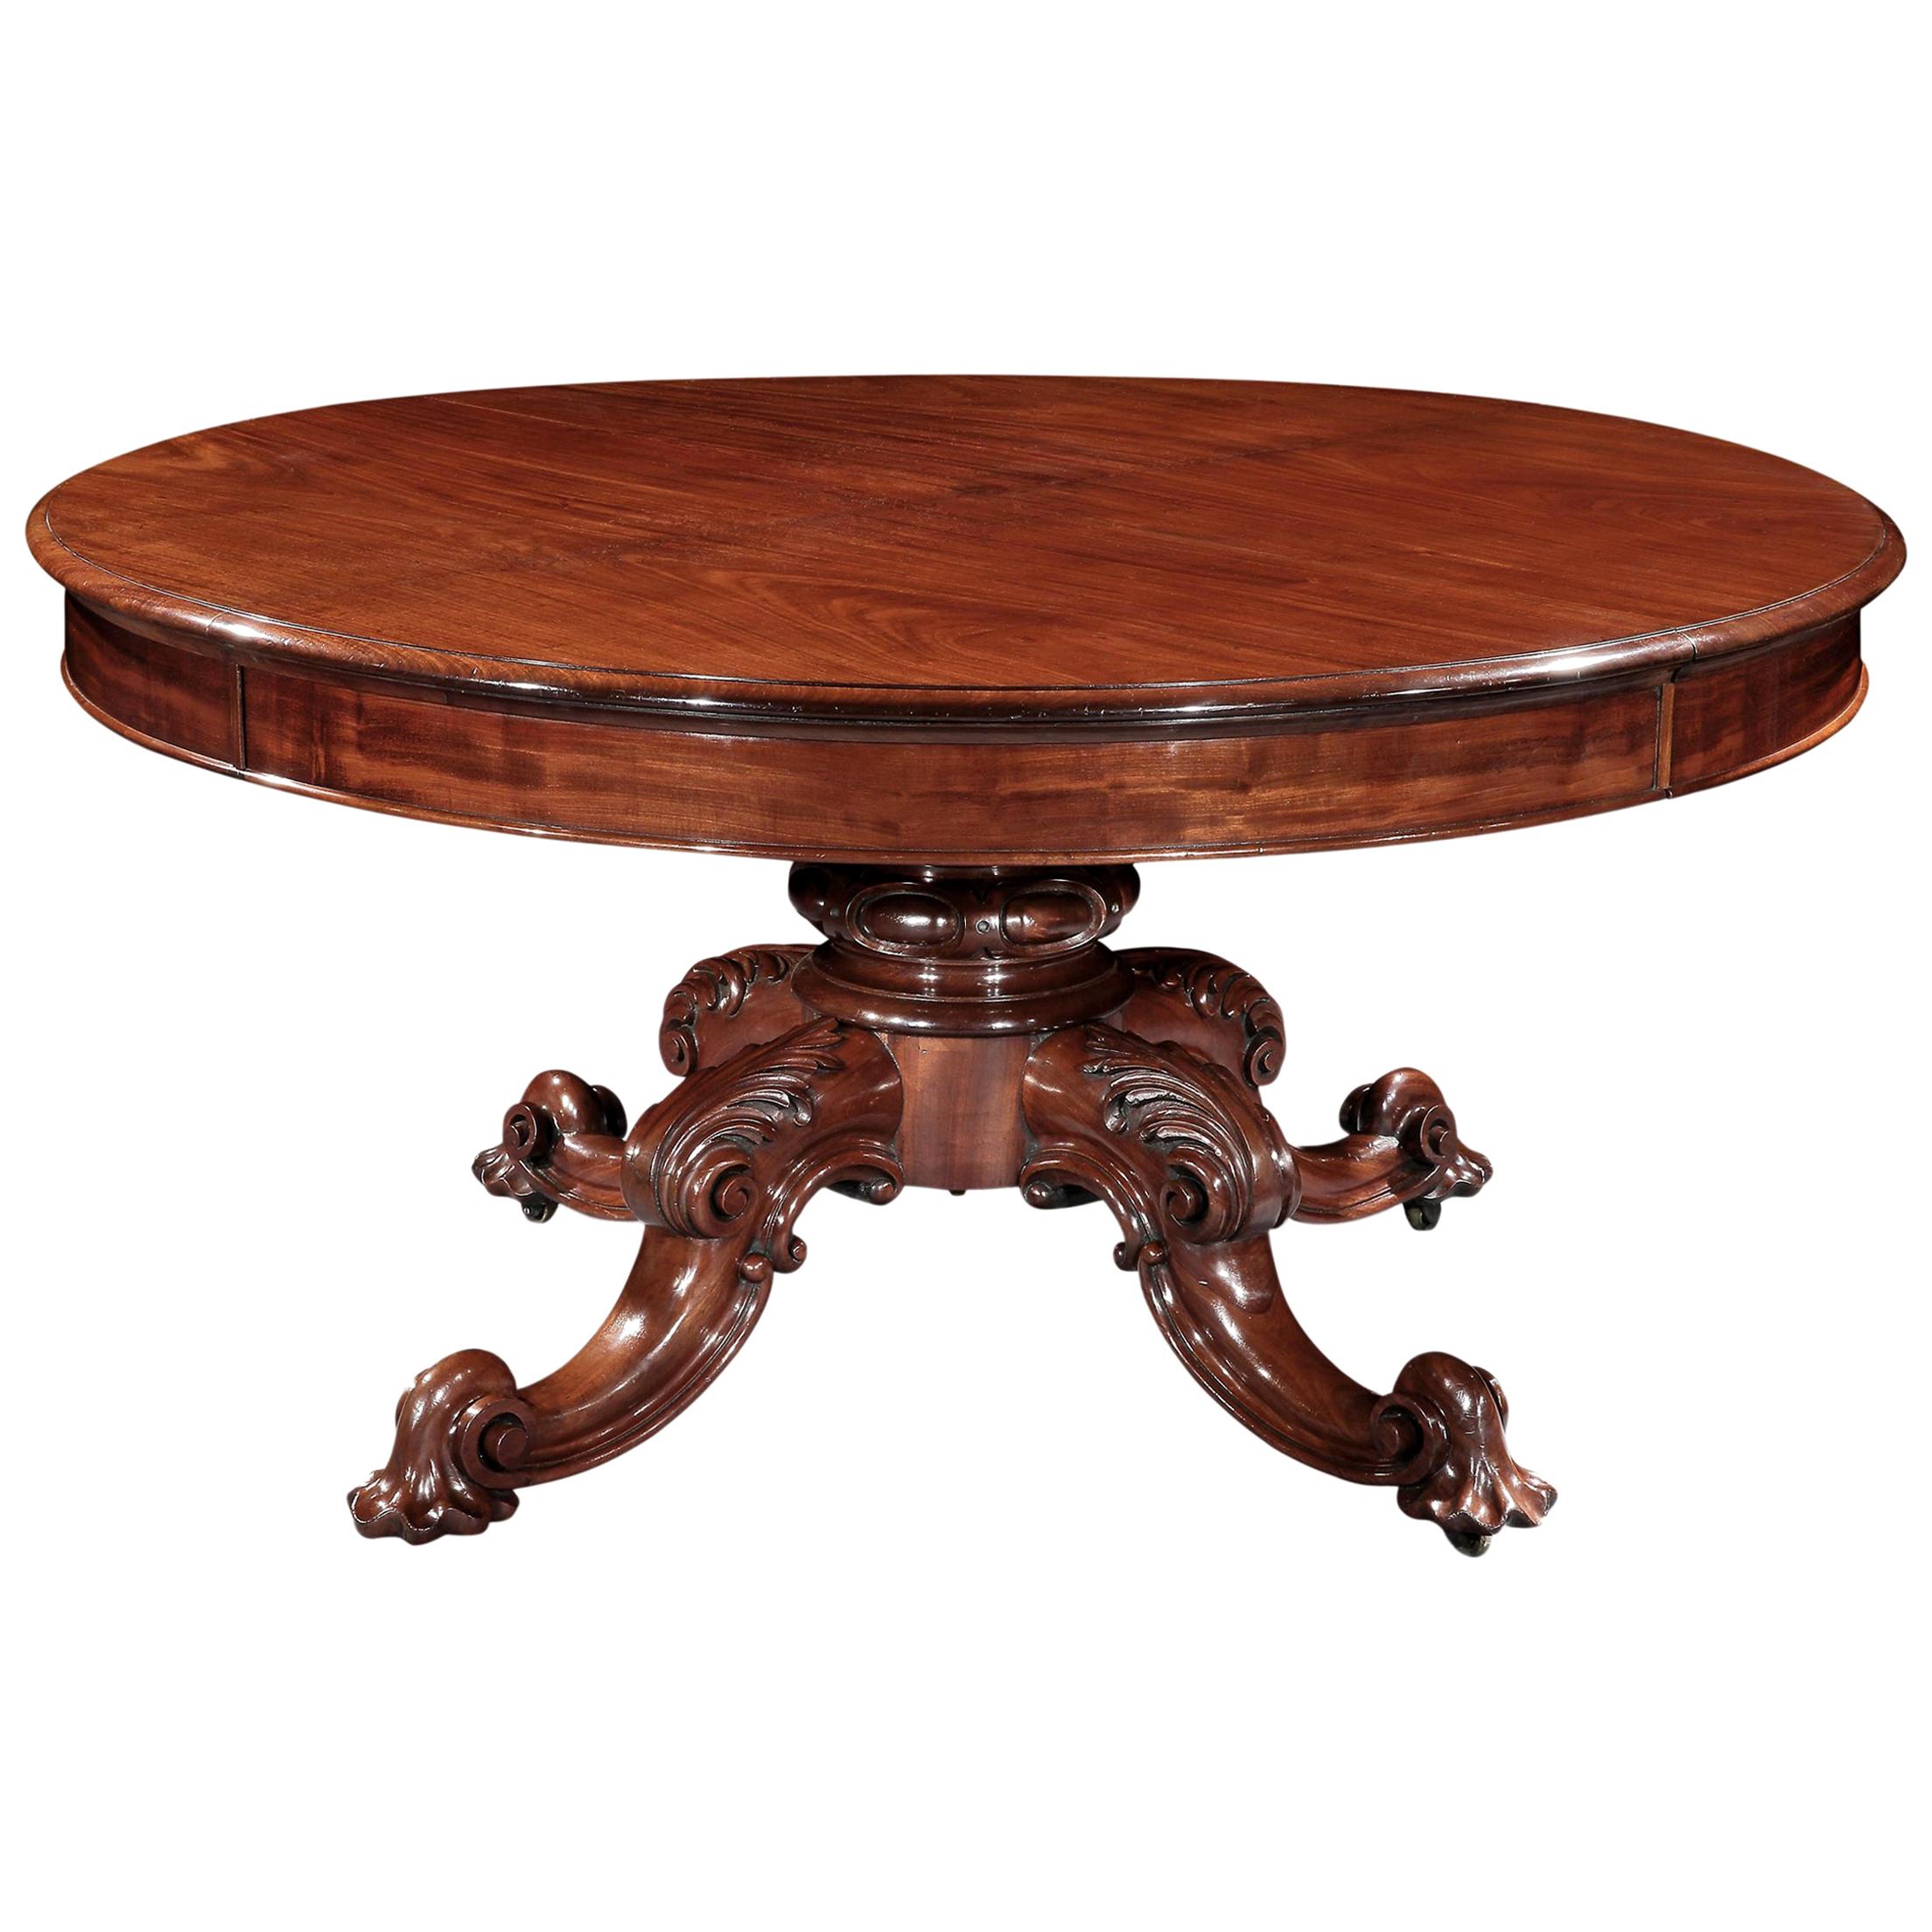 Handsome 19th Century Mahogany Dining Table with Unusual Wind-Out Mechanism For Sale